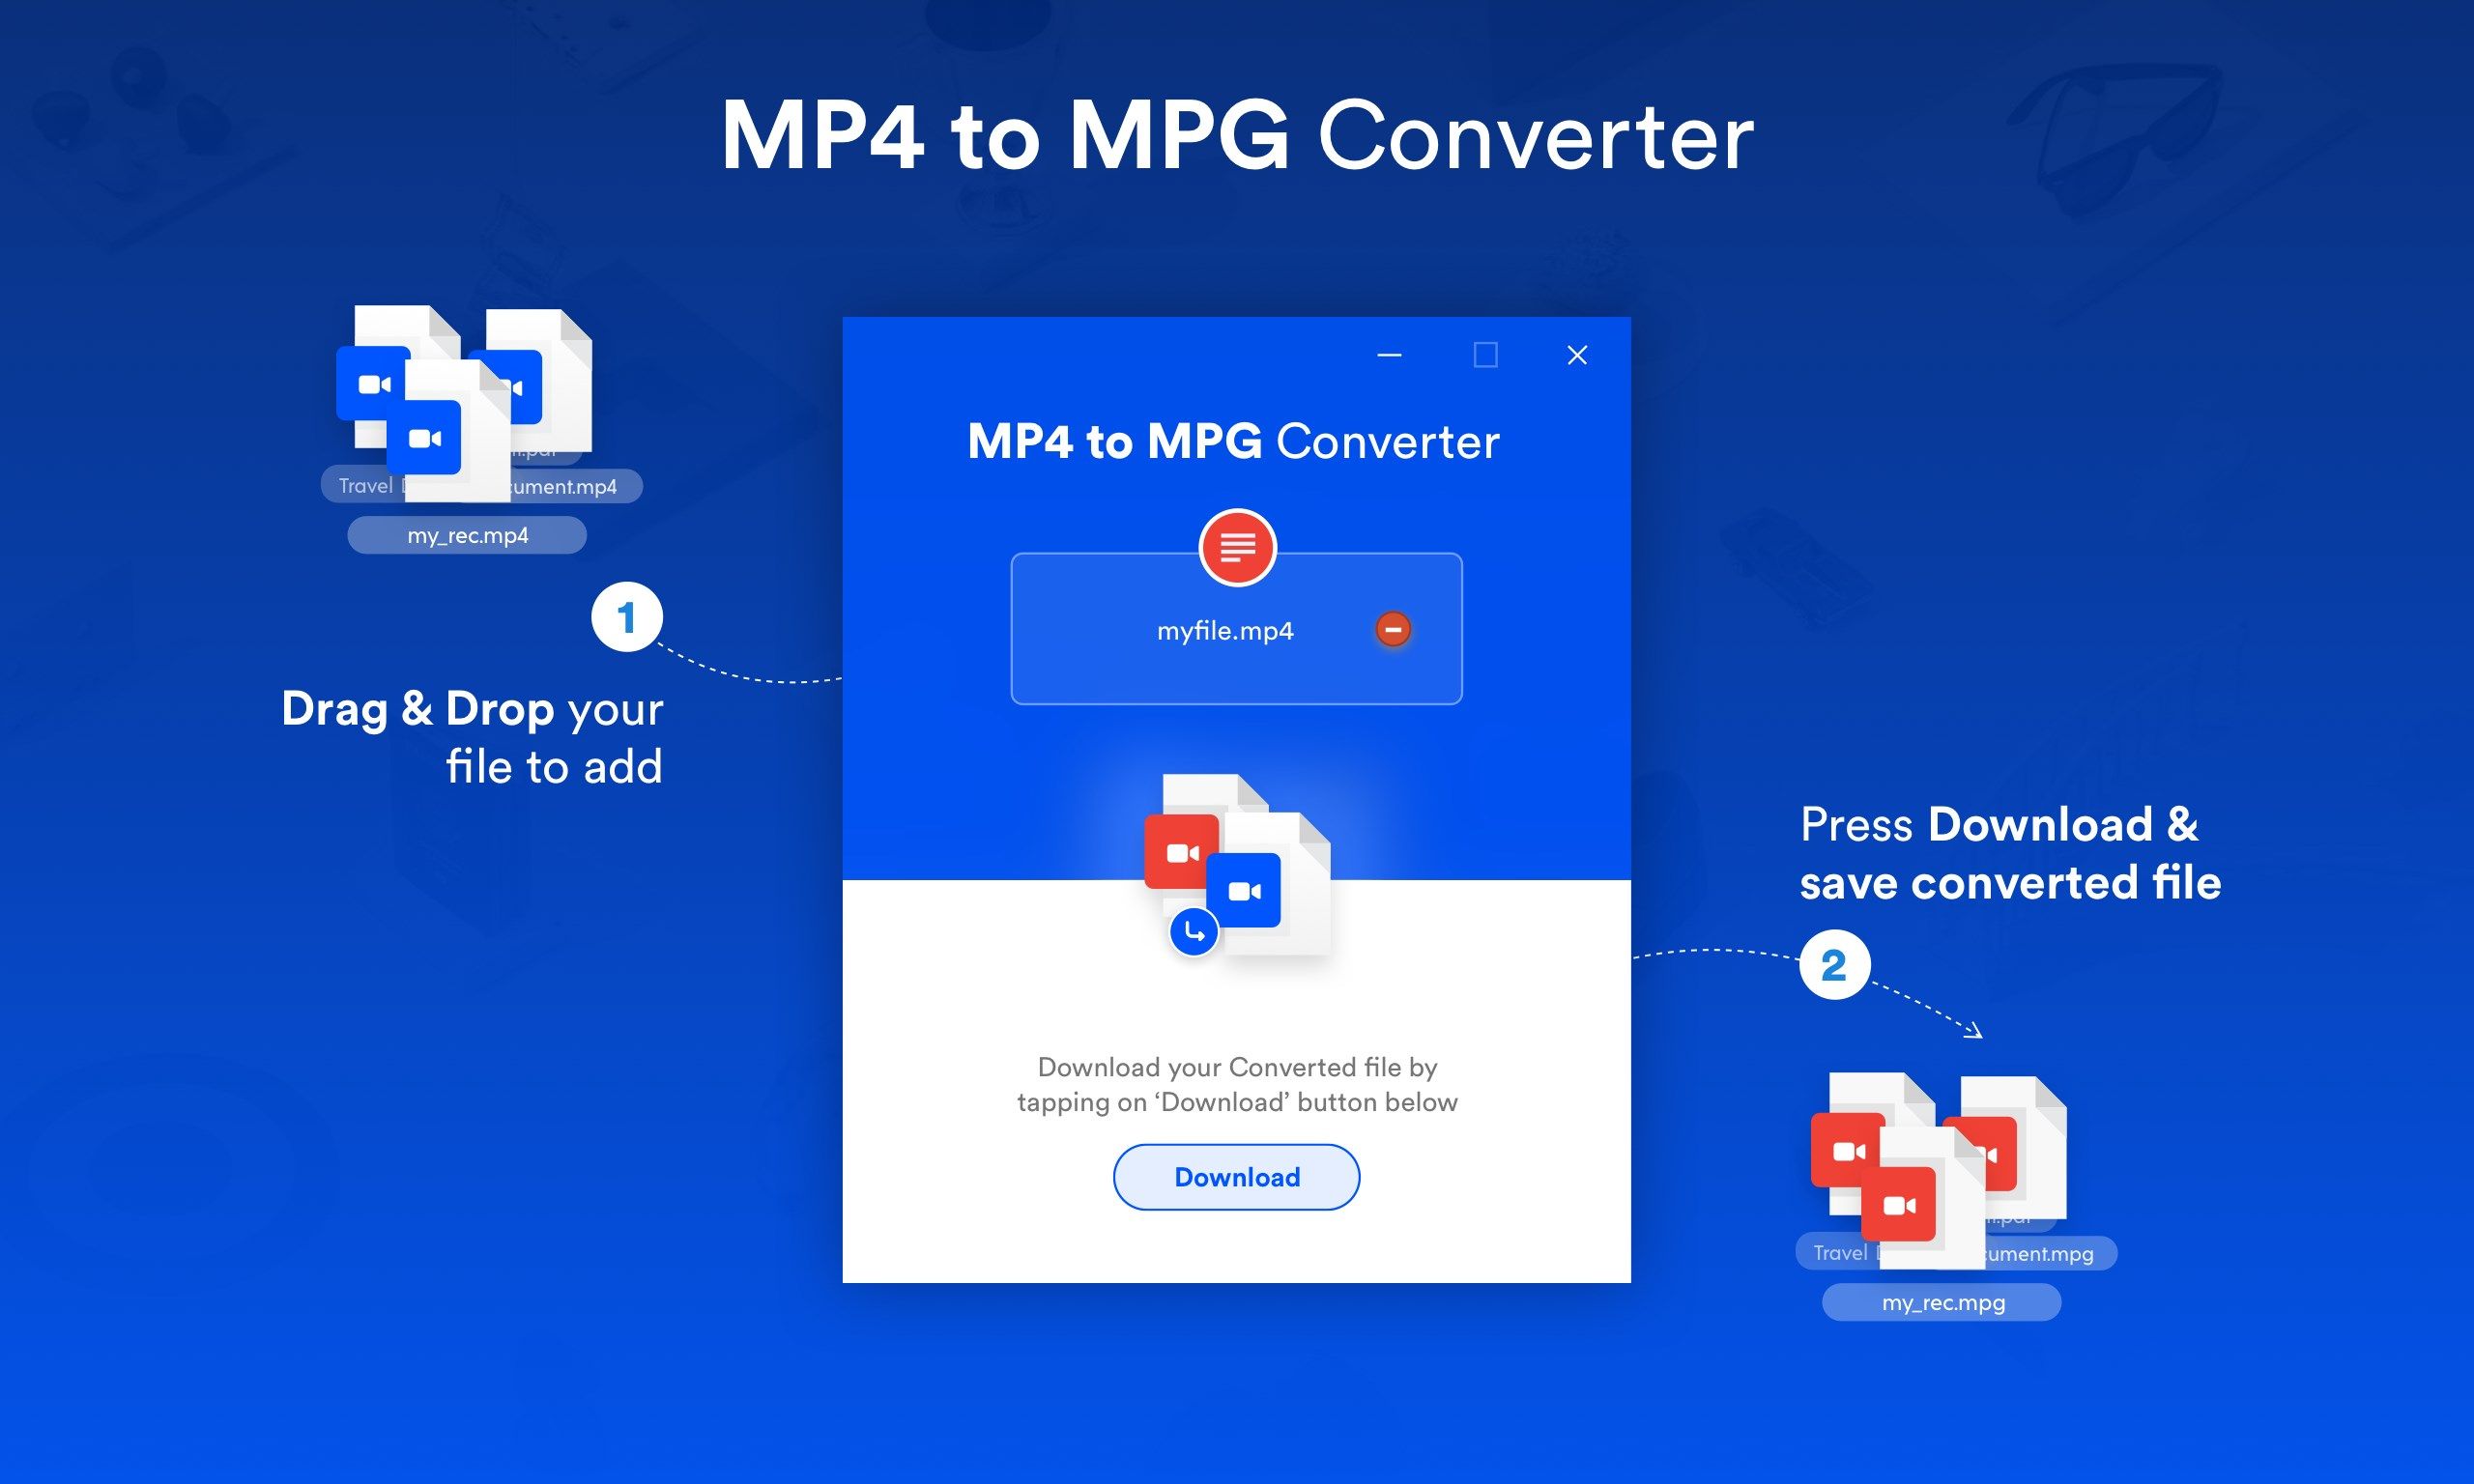 MP4 to MPG Converter